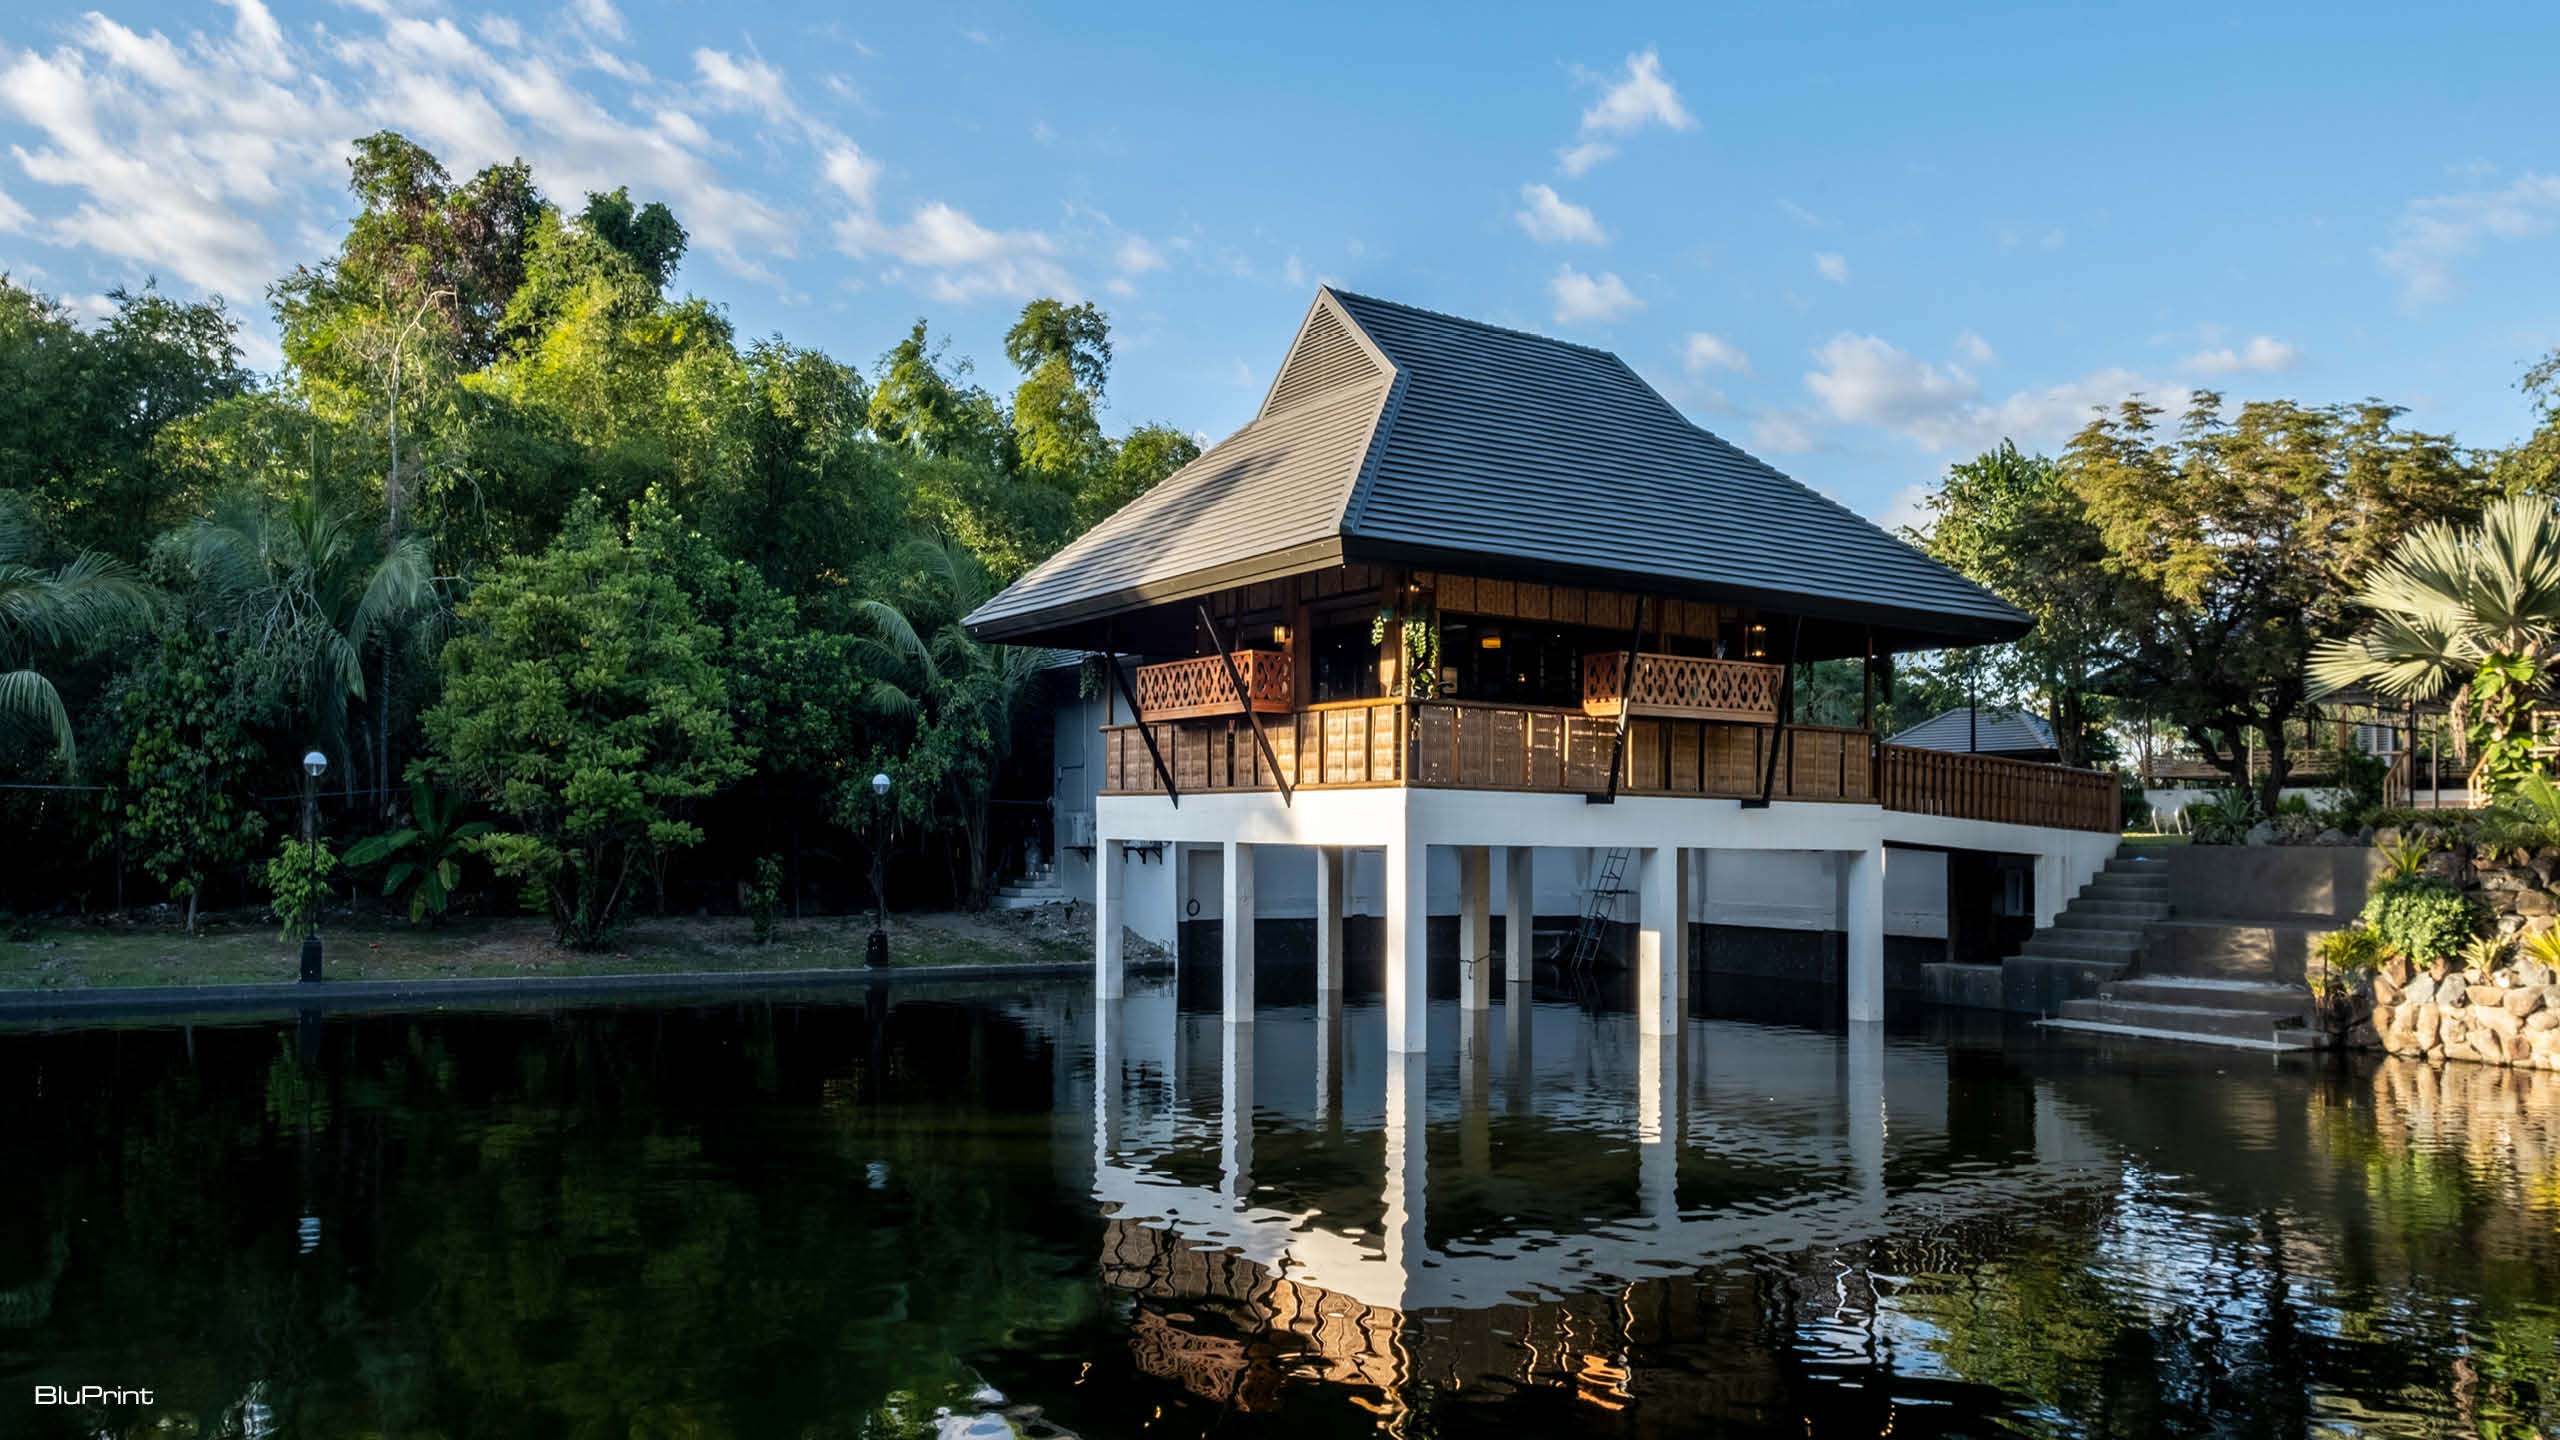 A modern bahay kubo with a pitched roof sitting above a small lake on concrete stilts.